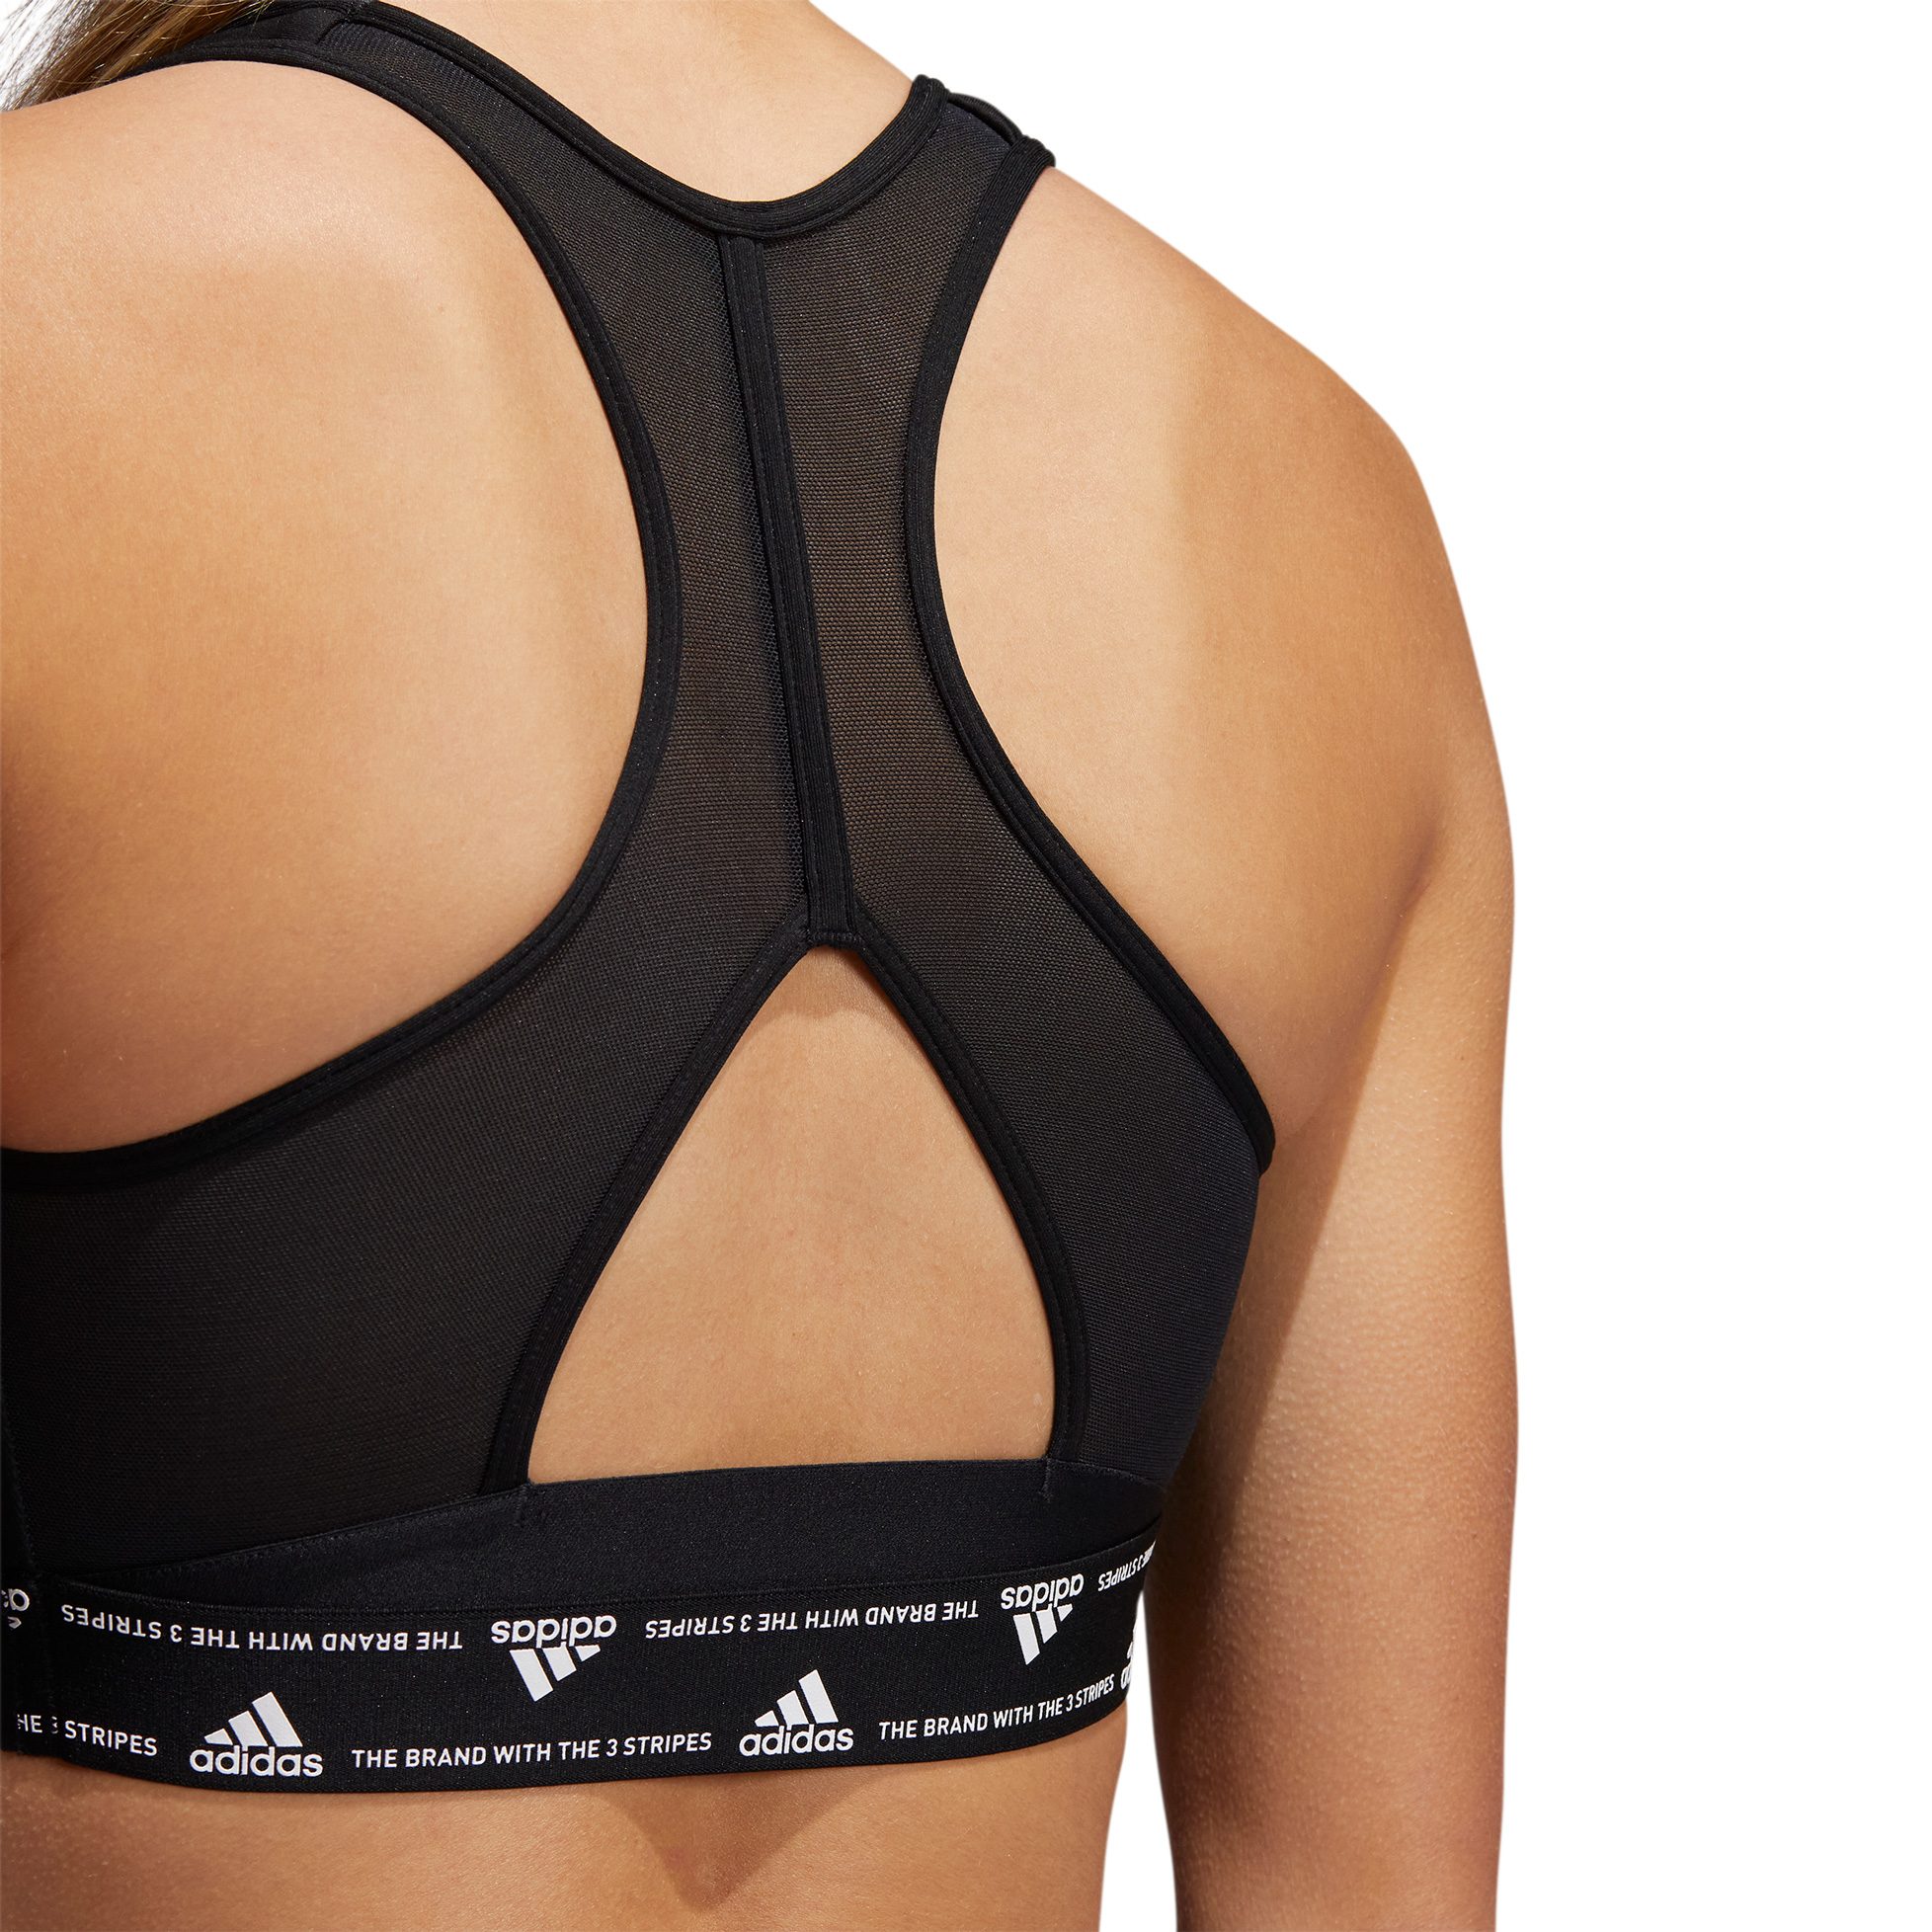 Men's soccer sports bras: Why are they wearing those GPS harnesses?